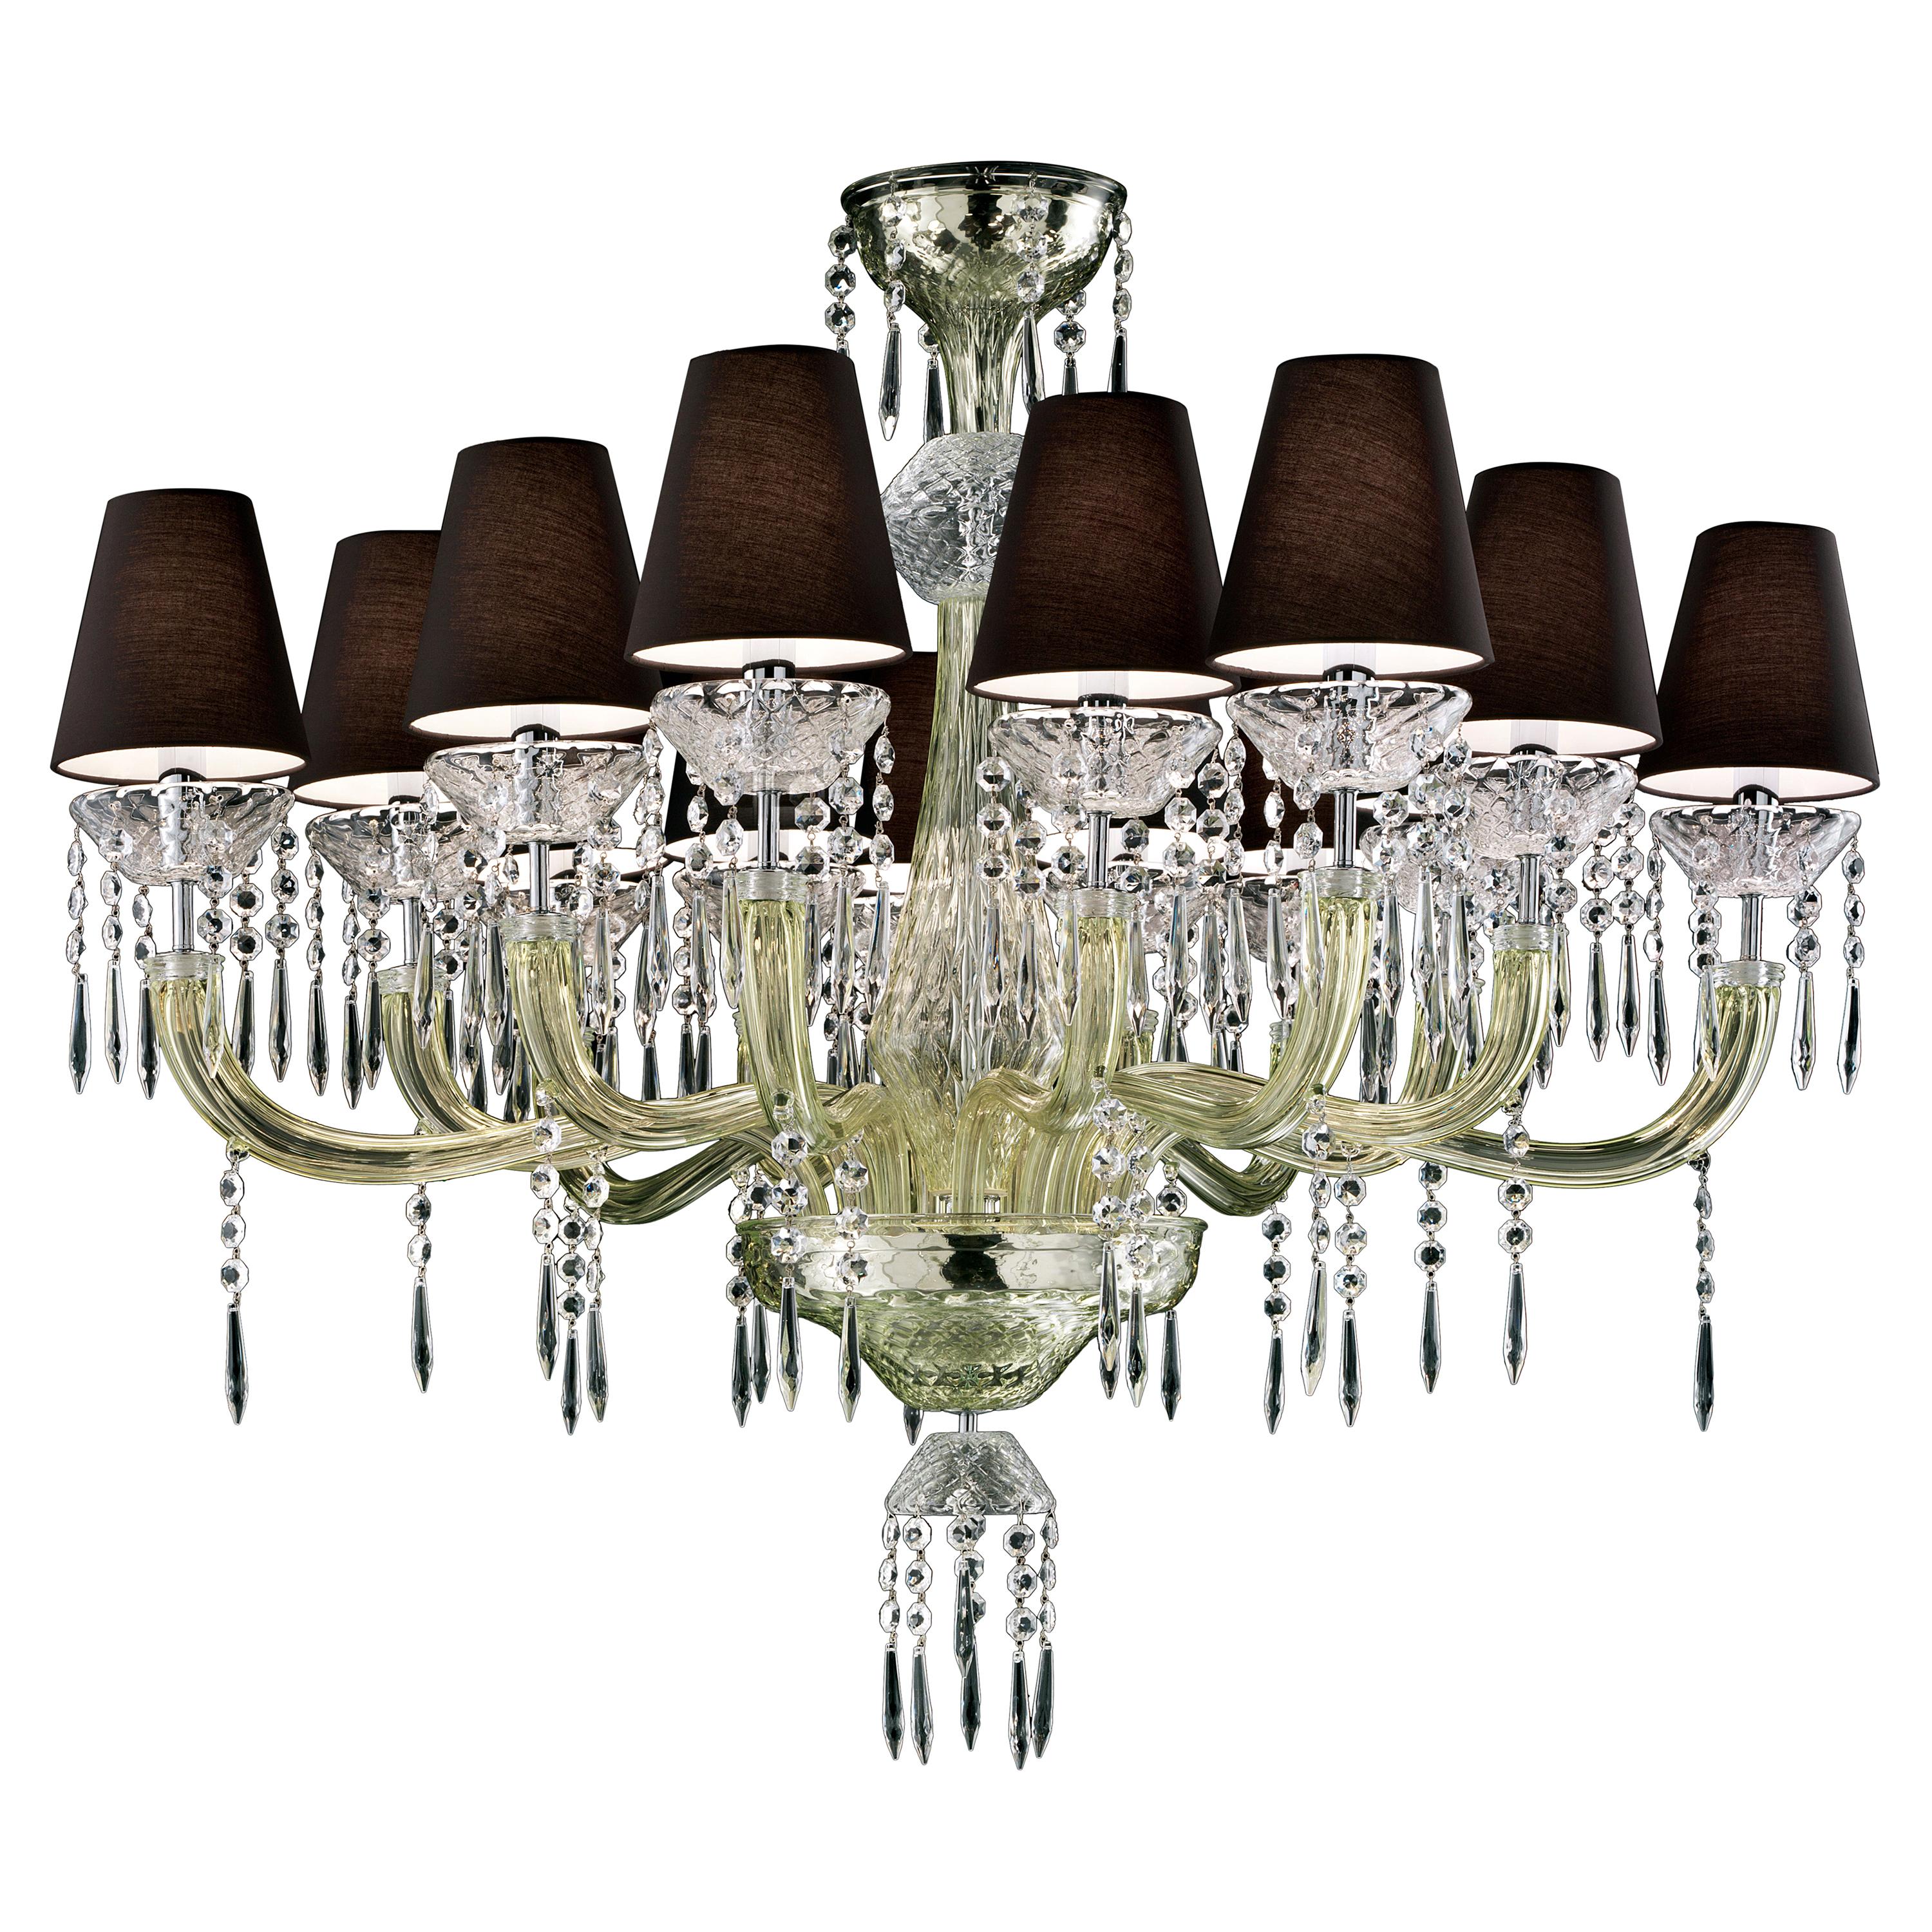 Green (Liquid Citron_EL) President 5695 14 Chandelier in Glass with Black Shade, by Barovier&Toso